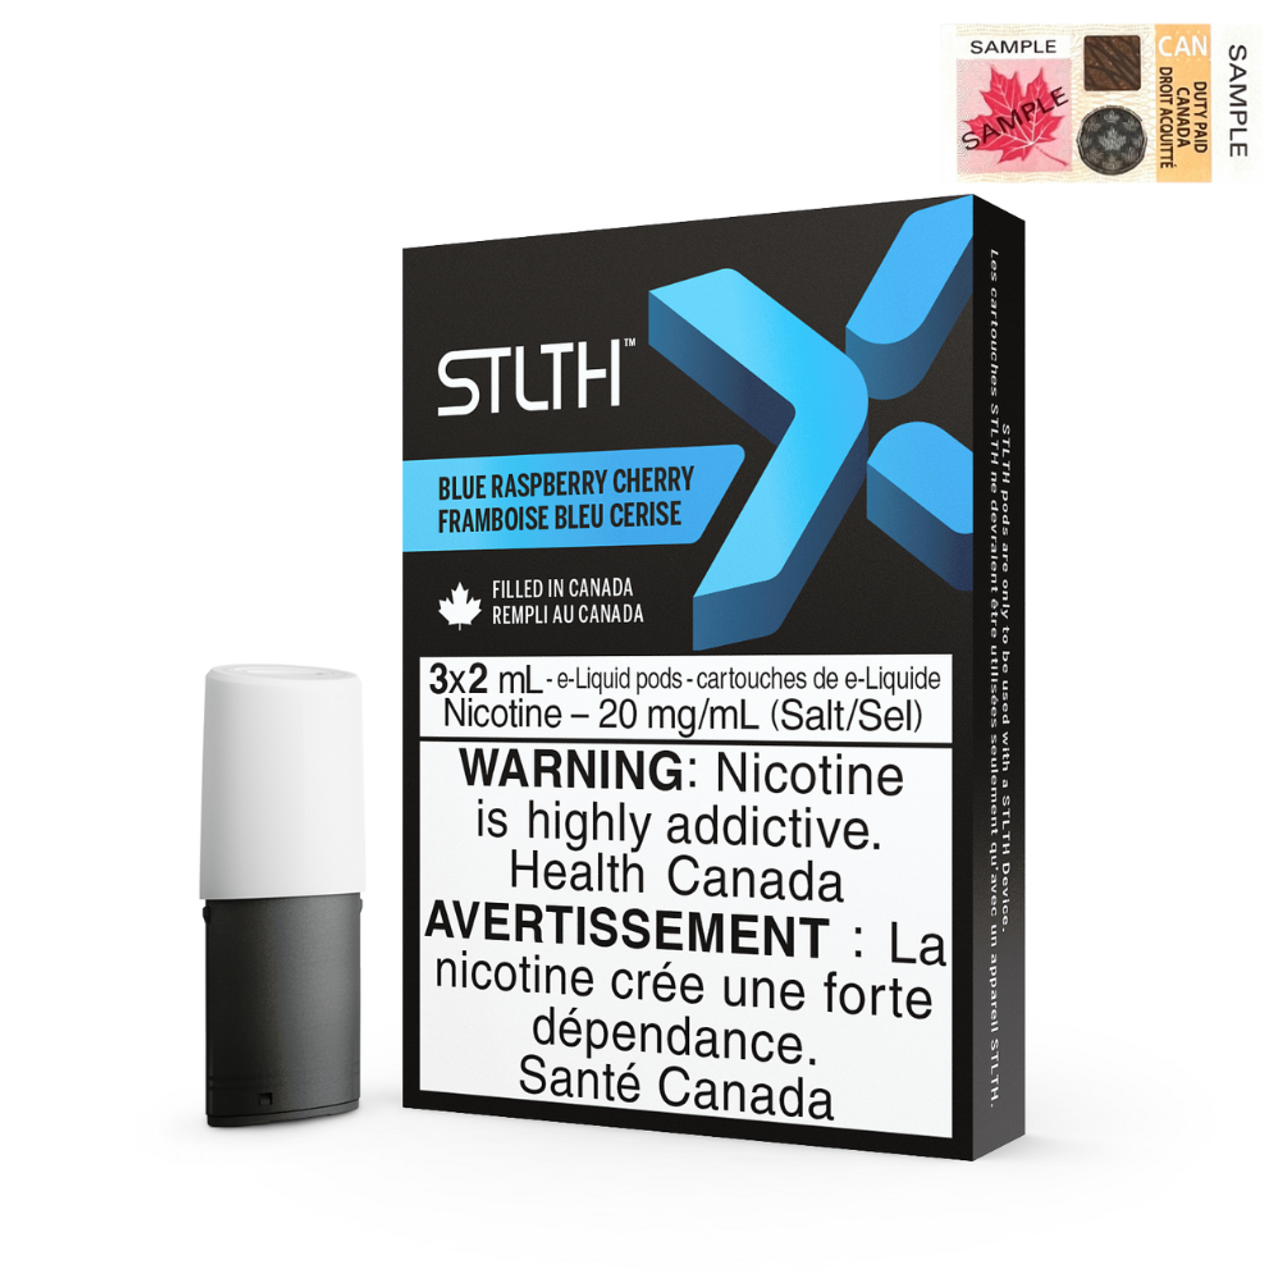 Blue Raspberry Cherry (Stamped) STLTH X Pods Pack of 3 - B.C. Compliance